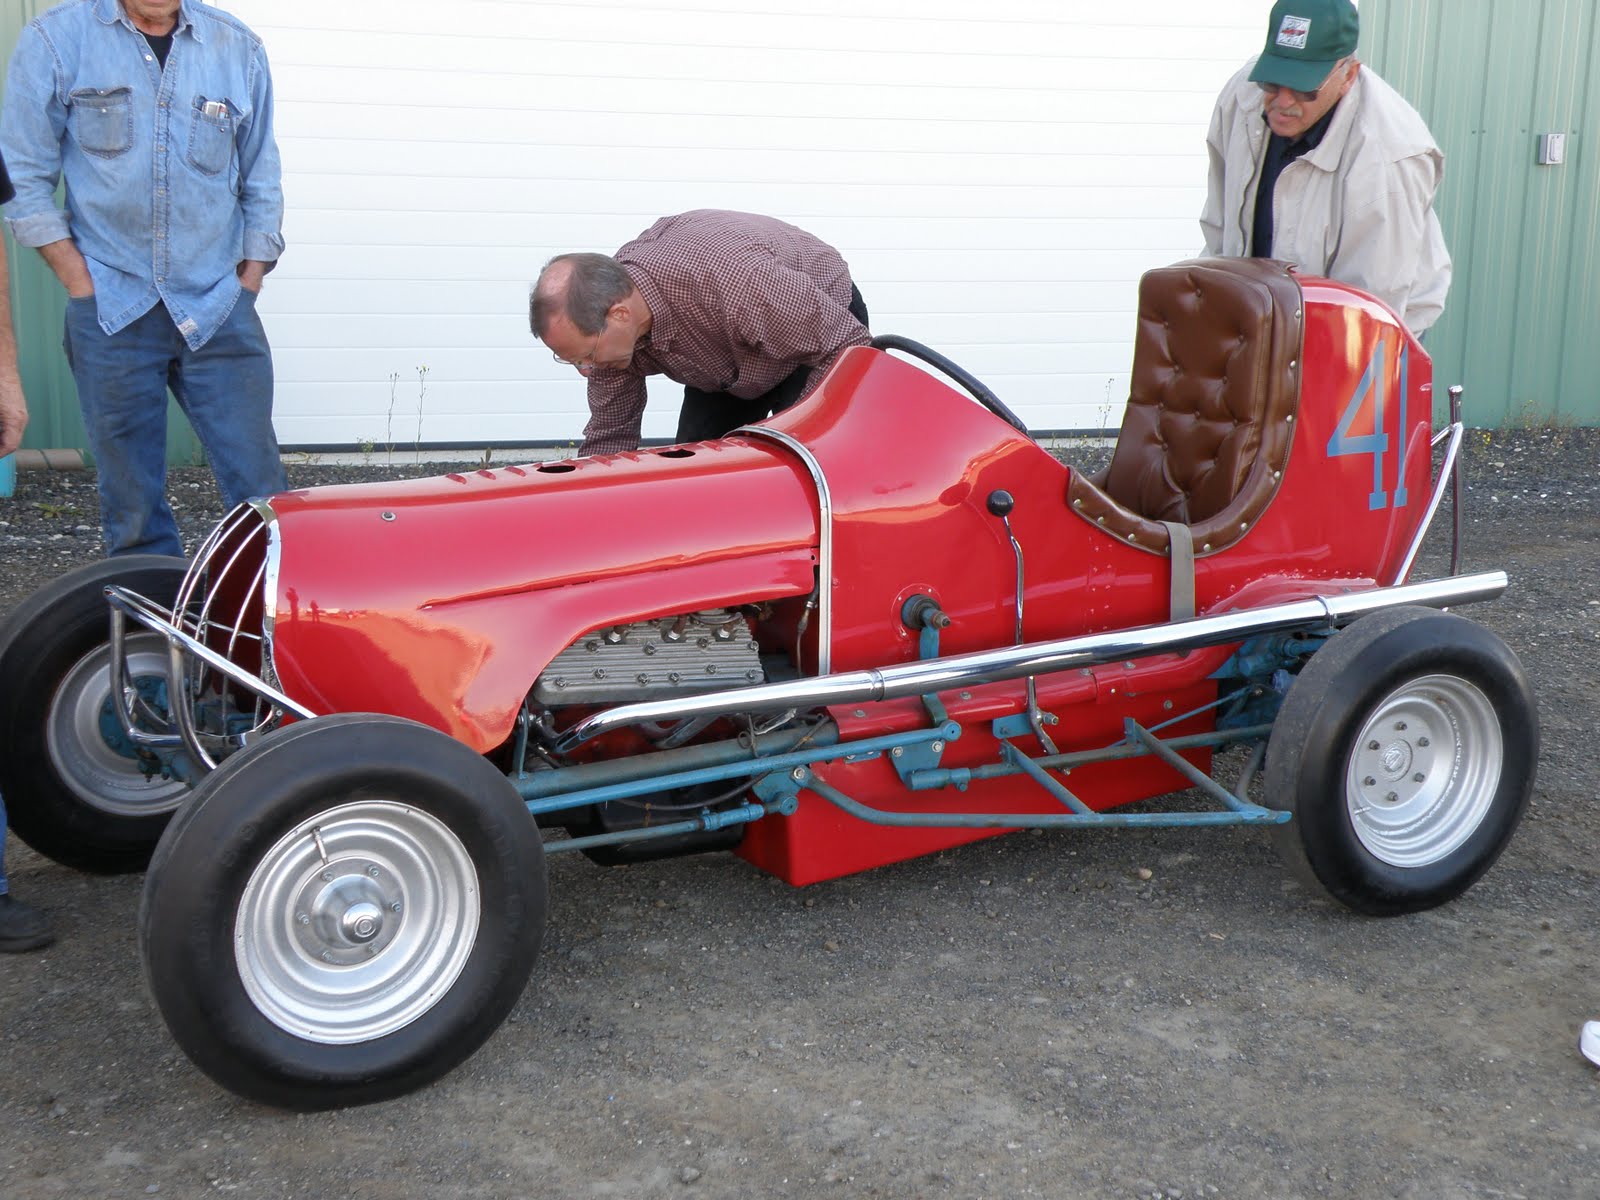 Fountainhead Antique Auto Museum: In the Shop: Winters-Ford V8-60 Midget Racer